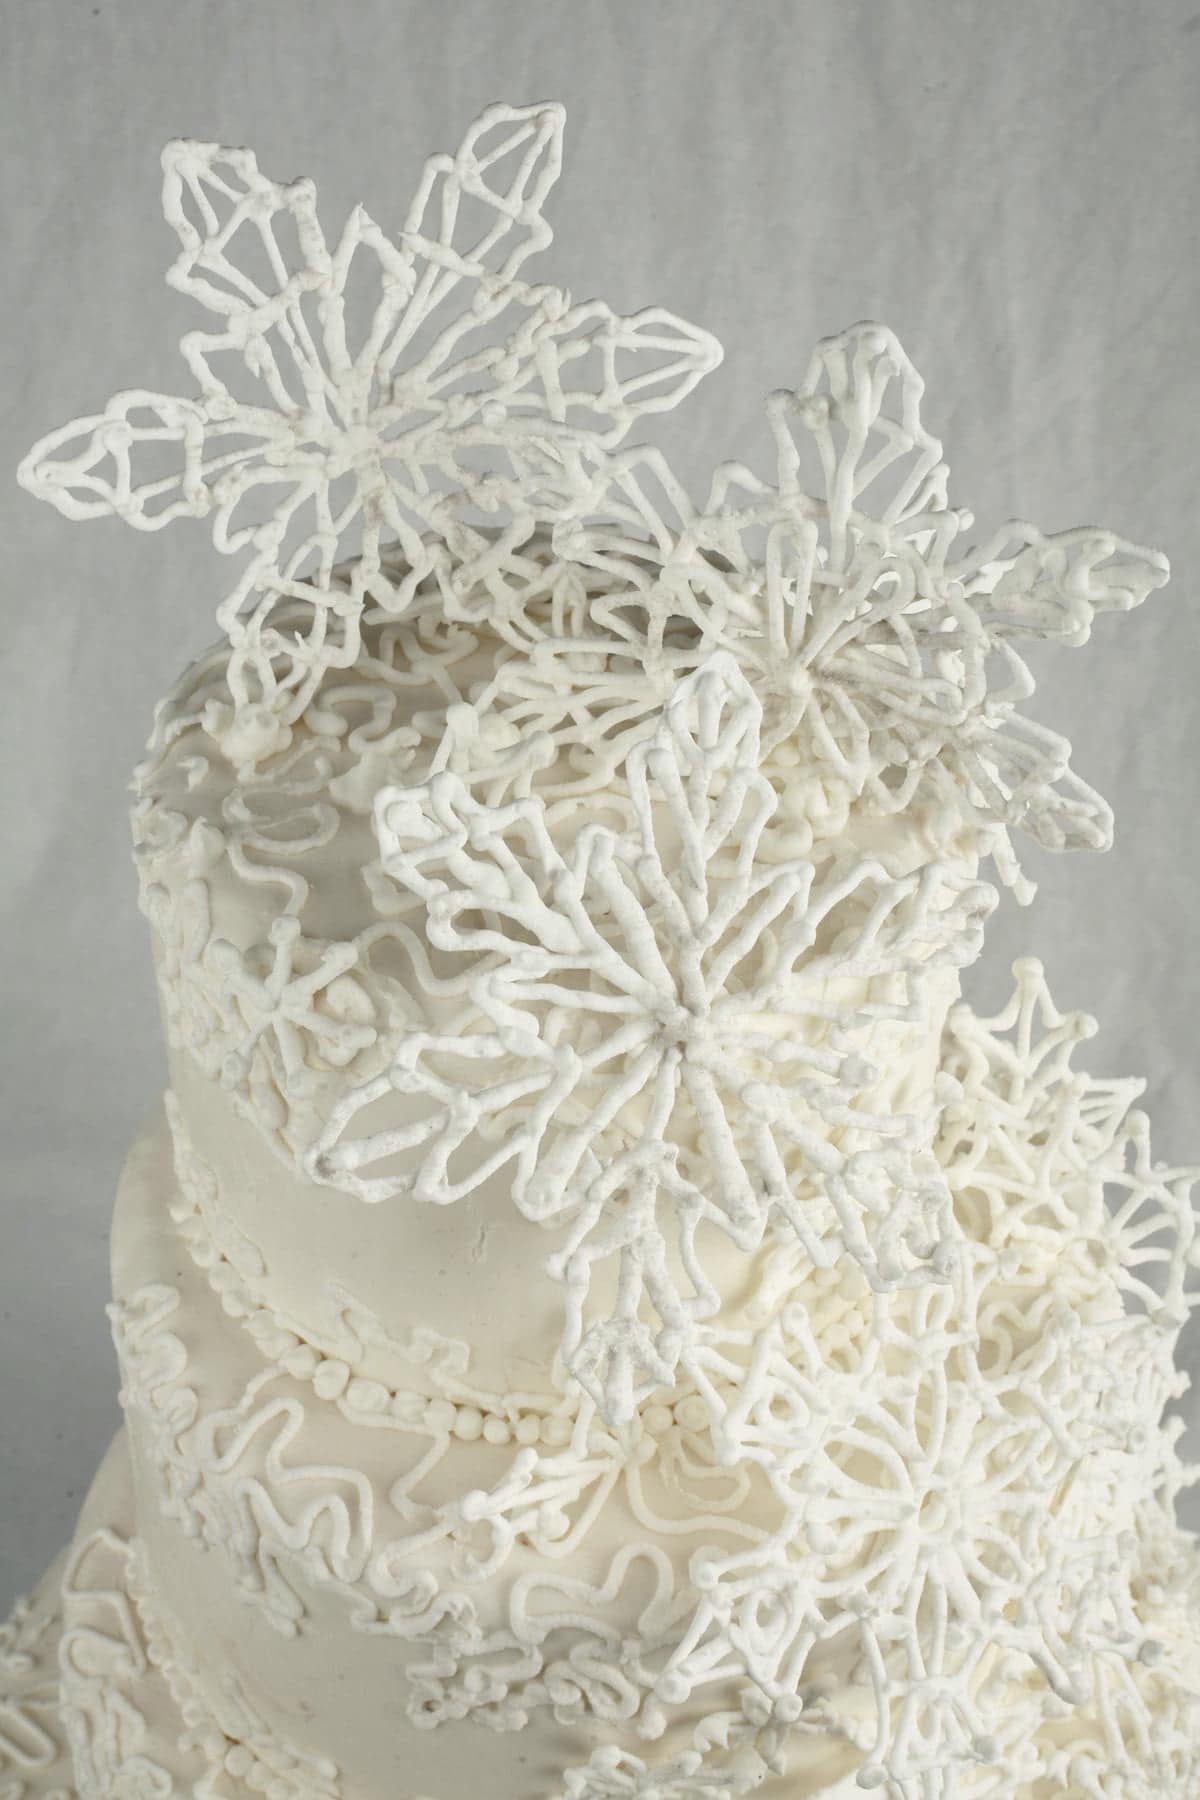 Detail photo of a 4 tier white wedding cake, piped with an intricate lace design, and adorned with a cascade of 3D piped snowflakes.